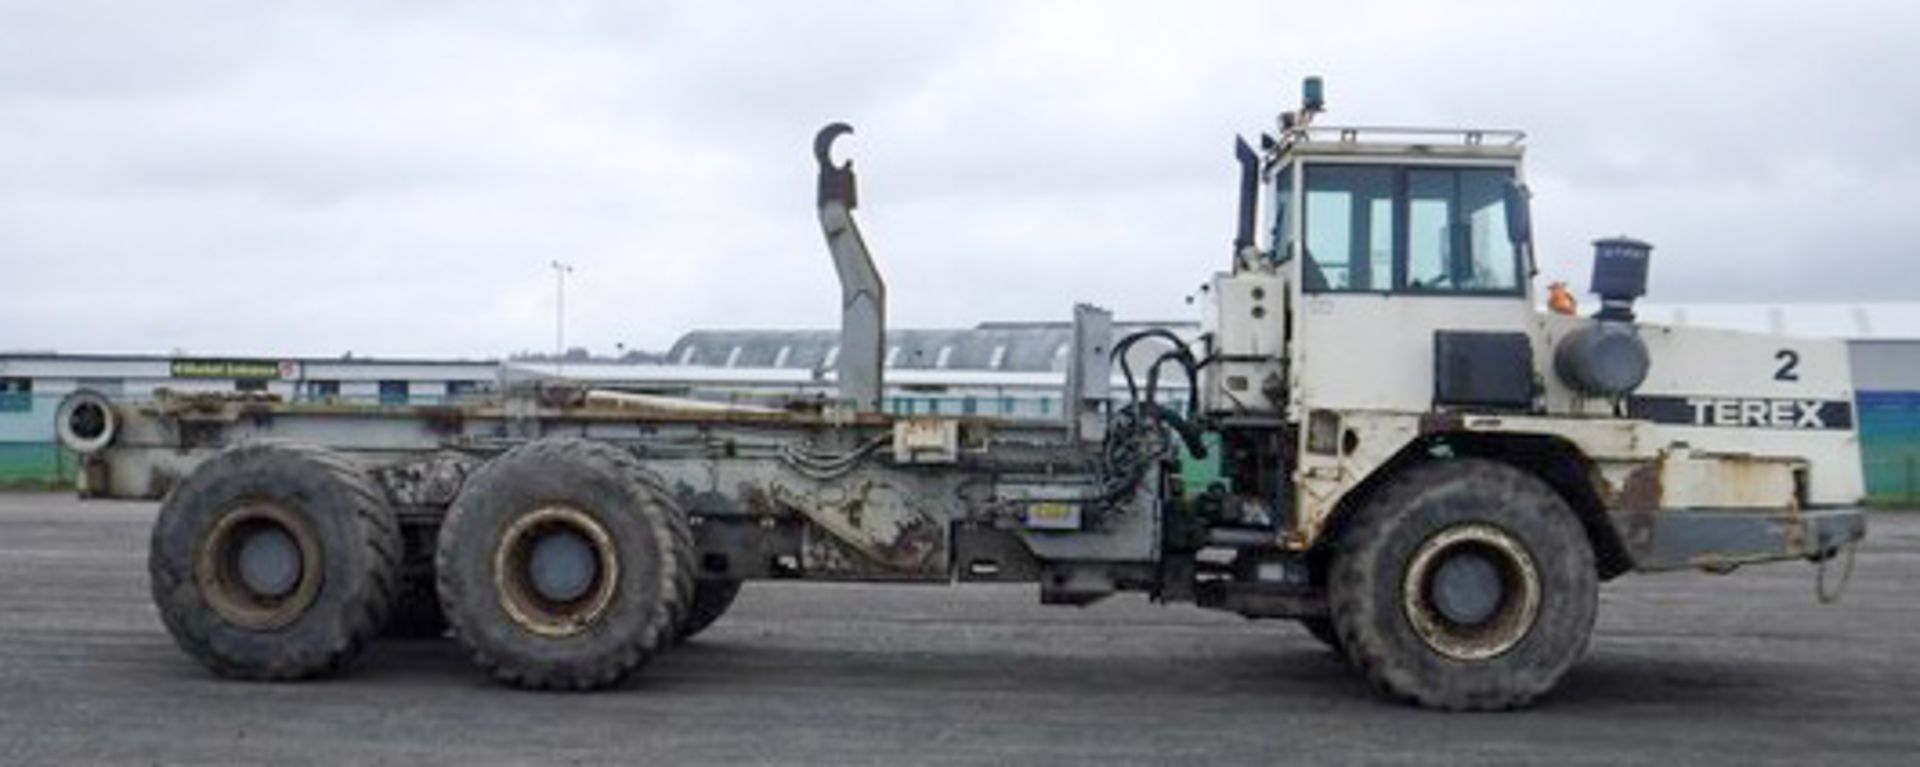 1999 TEREX TA 25, S/N 7961012, SERVICED EVERY 500HRS, USED FOR BREAKDOWN COVER - Image 13 of 18